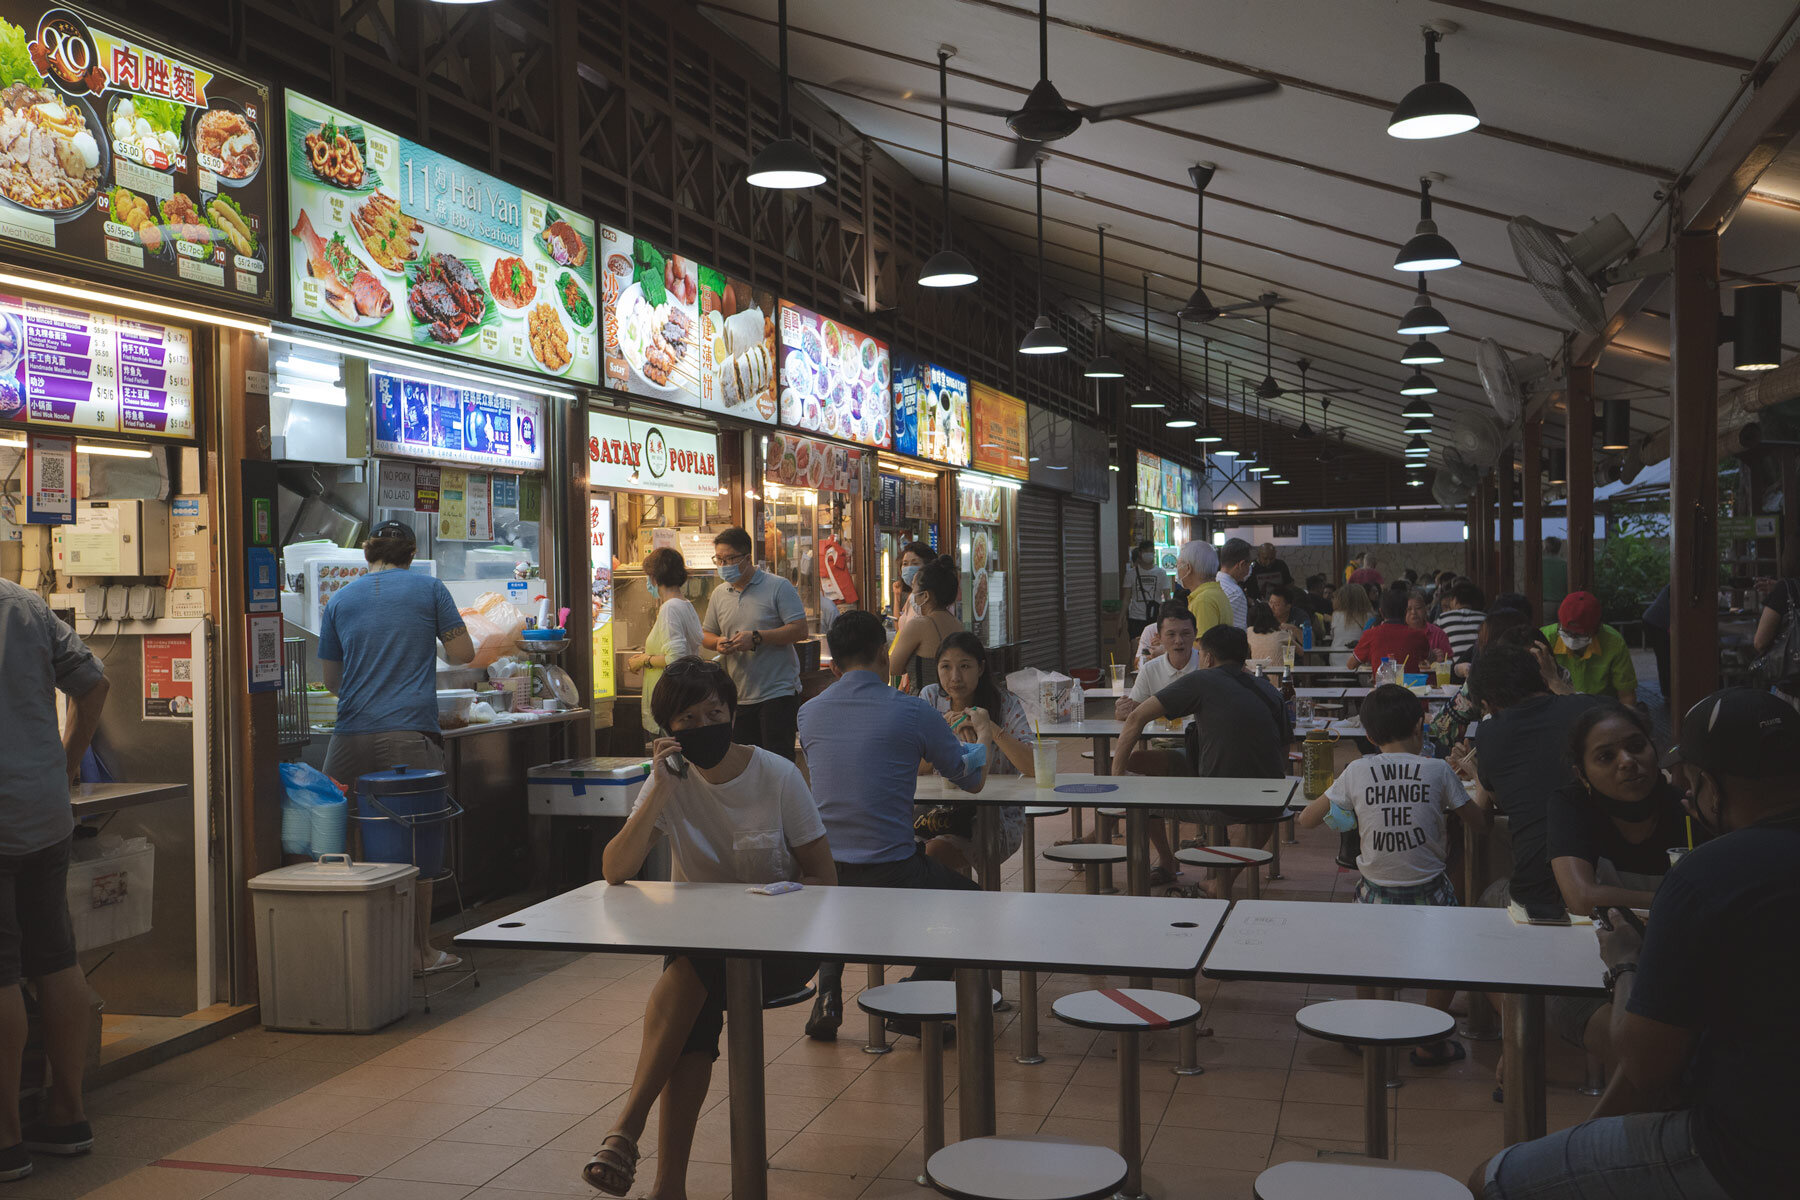 A typical hawker center in Singapore.